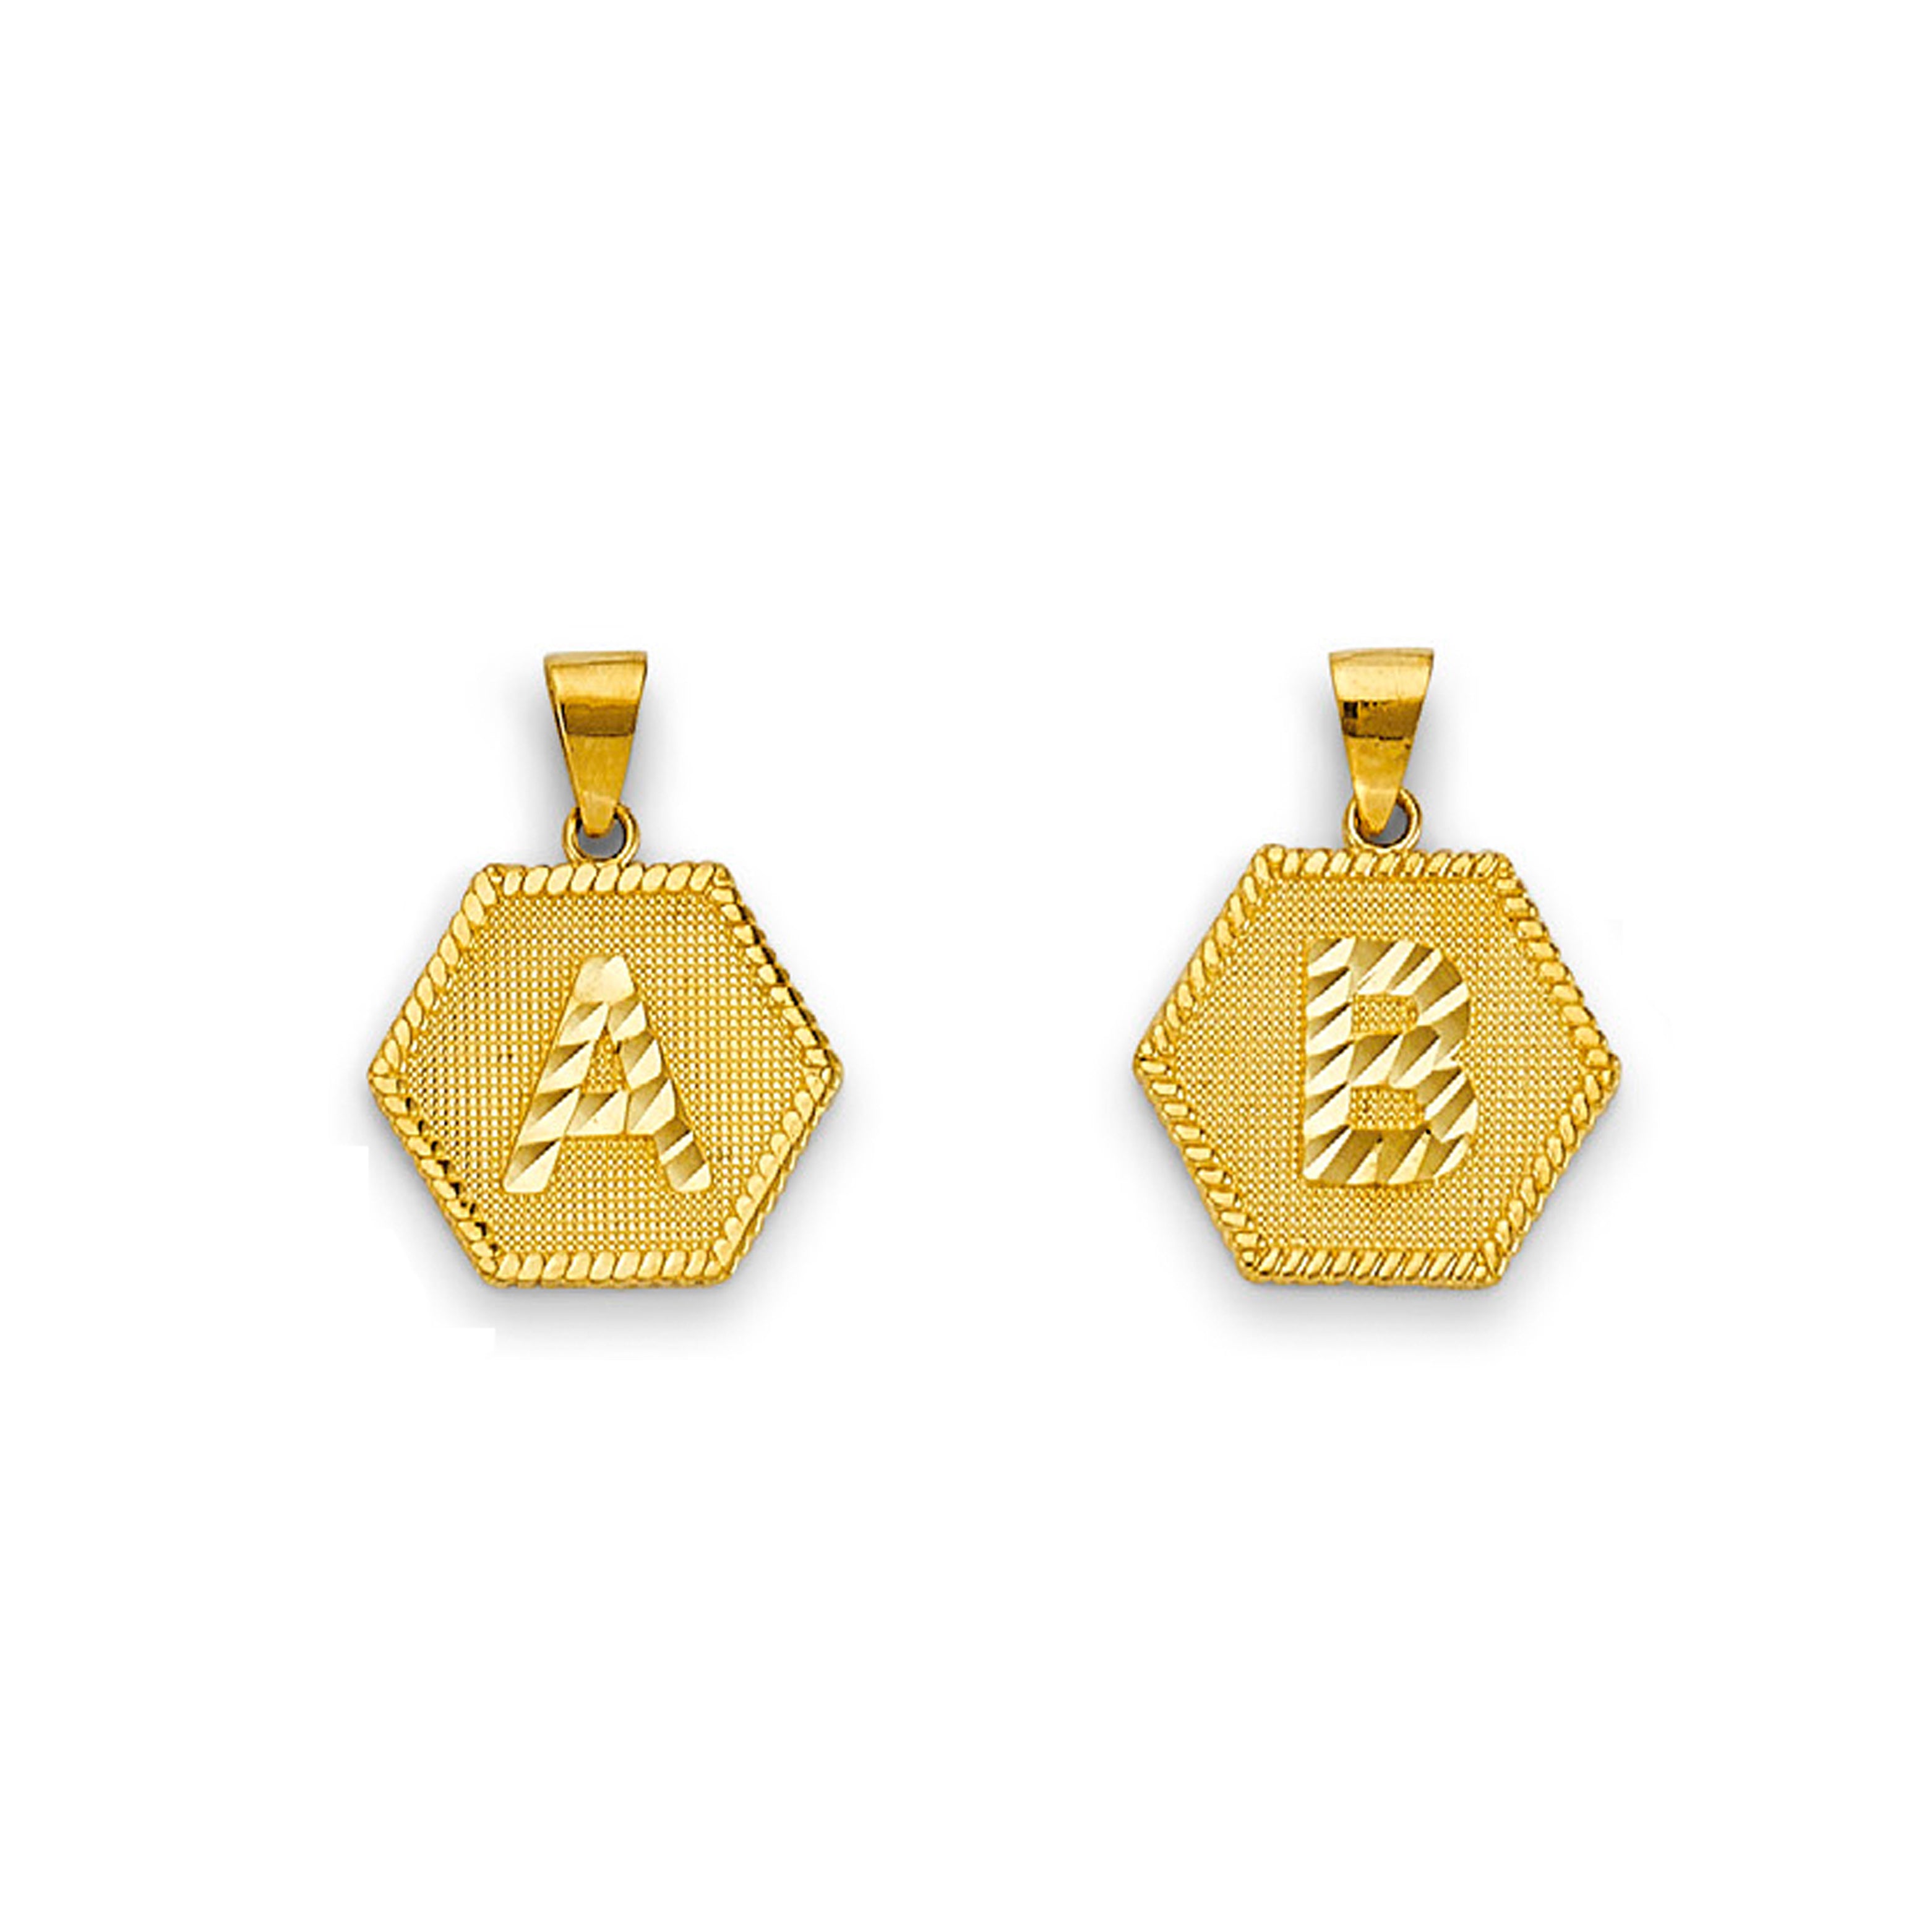 Yellow Gold Initial Letter Hexagonal Tag Pendant